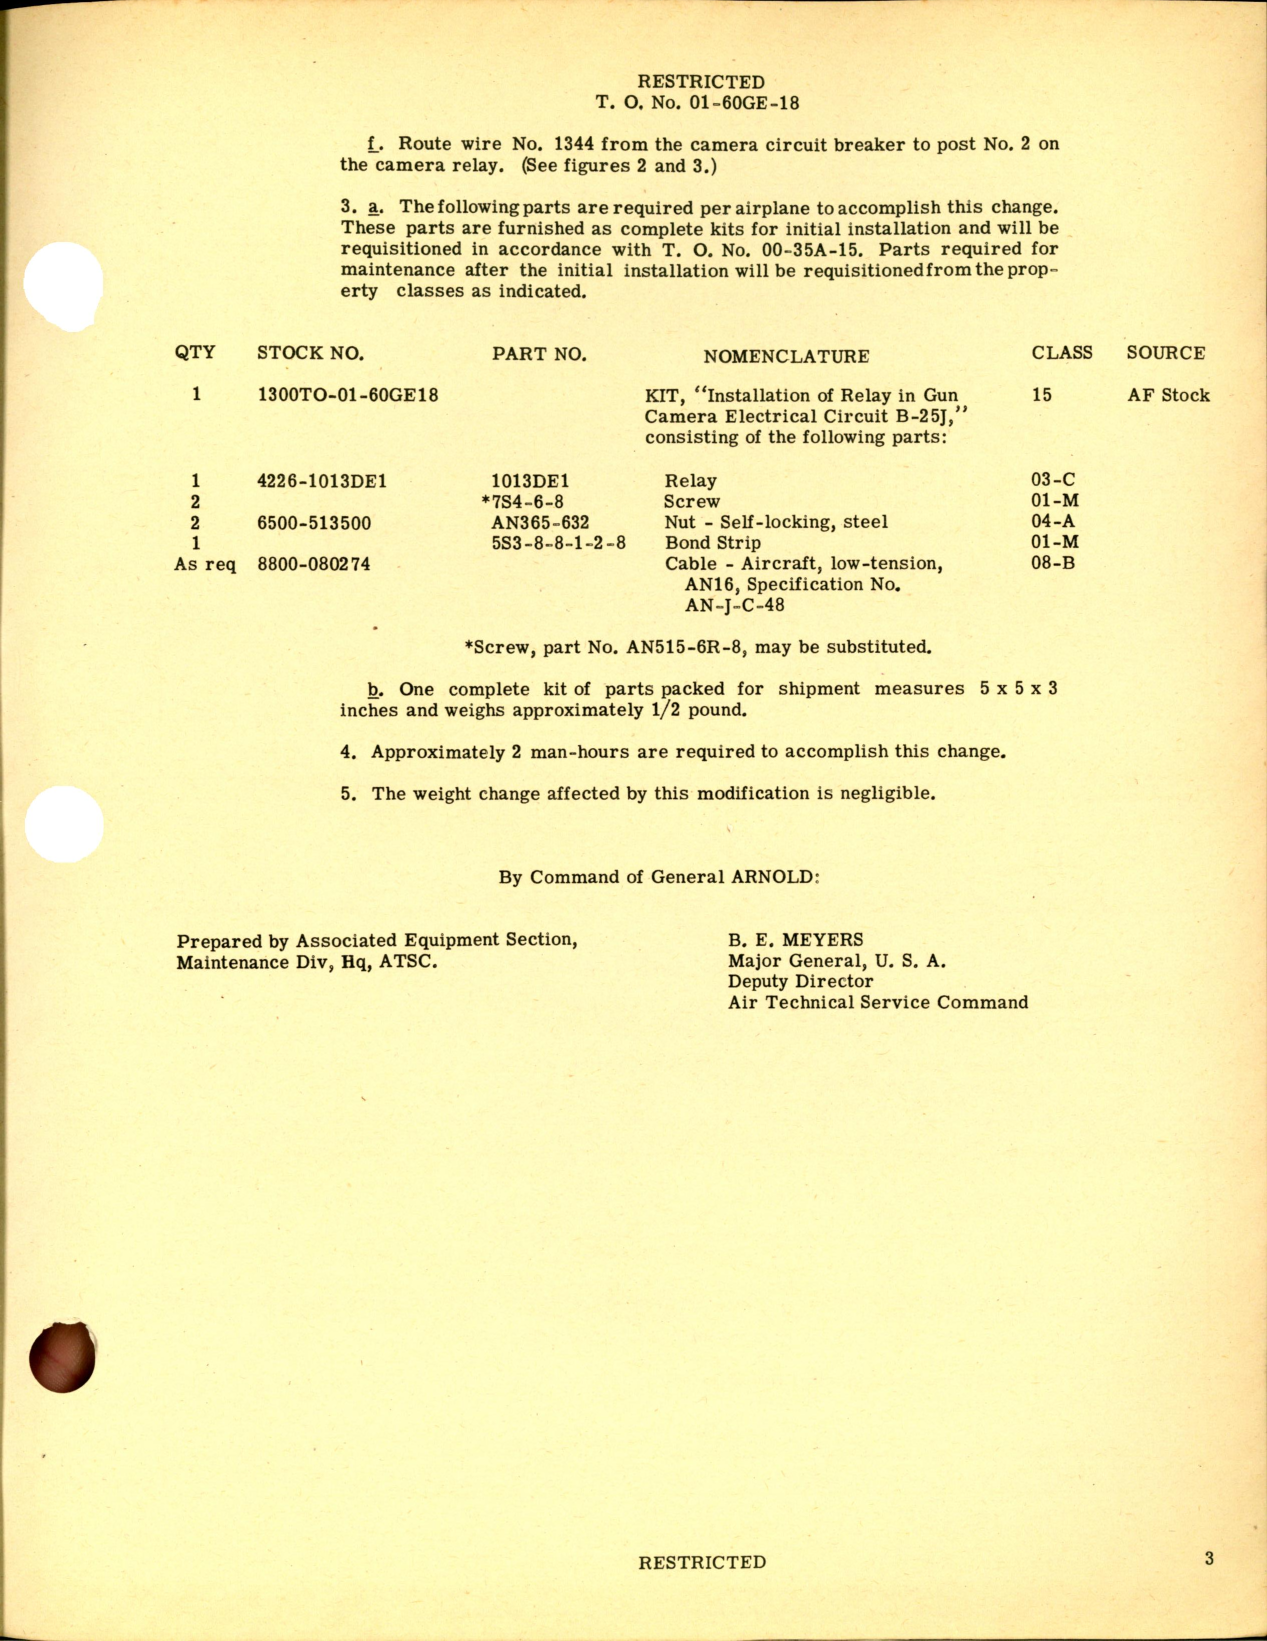 Sample page 3 from AirCorps Library document: Installation of Relay in Gun Camera Electrical Circuit for B-25J